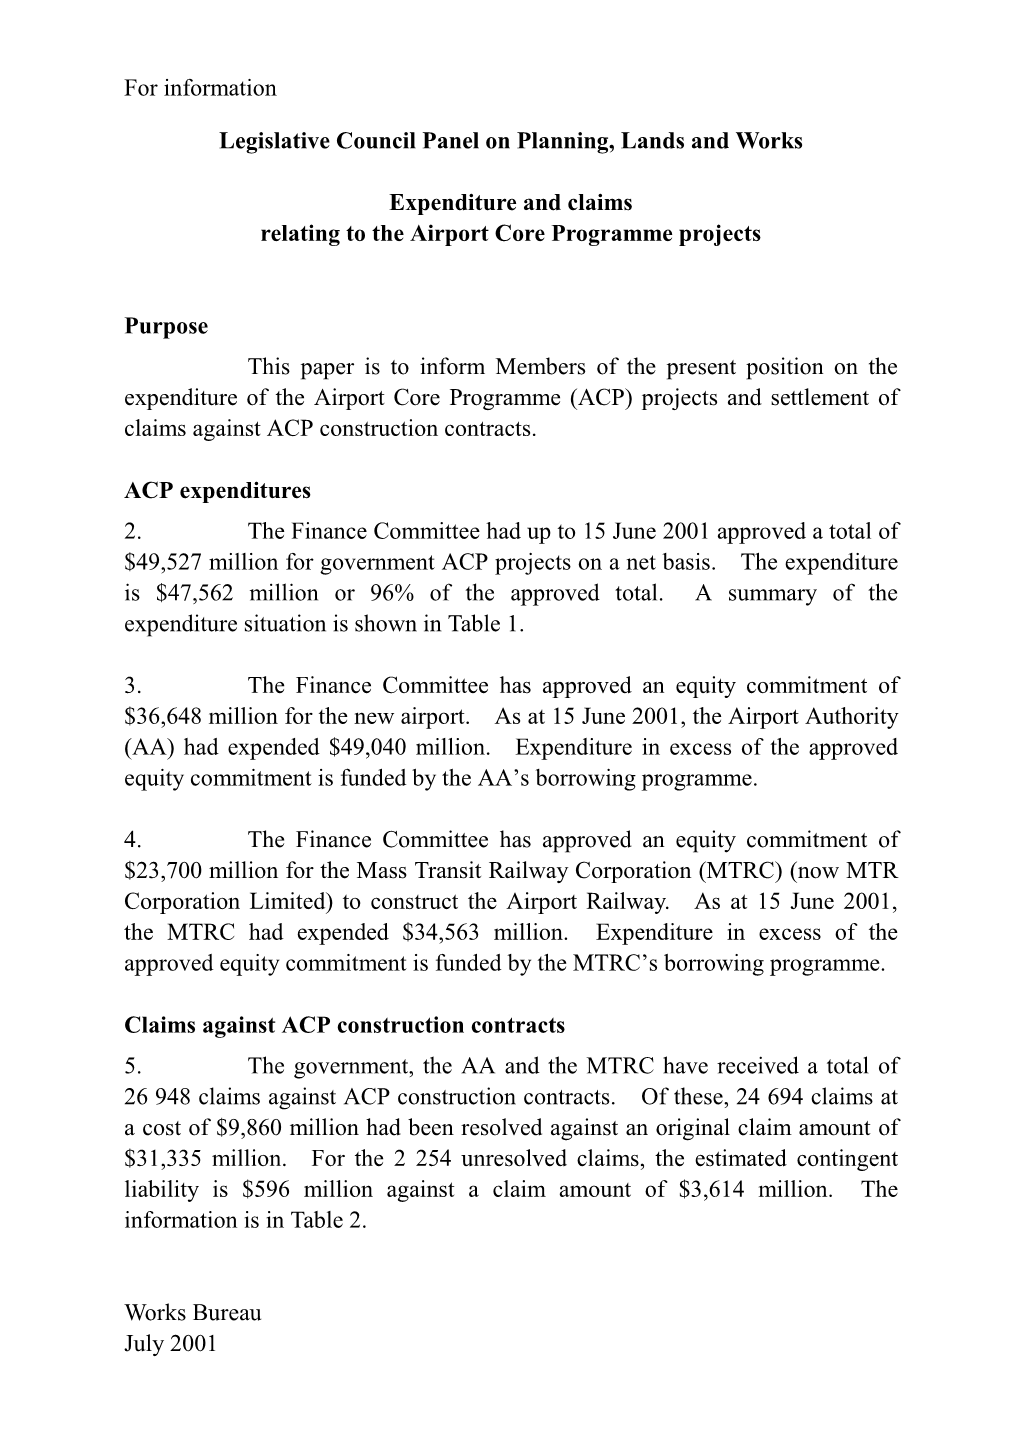 Expenditure and Claims Relating to the Airport Core Programme Projects